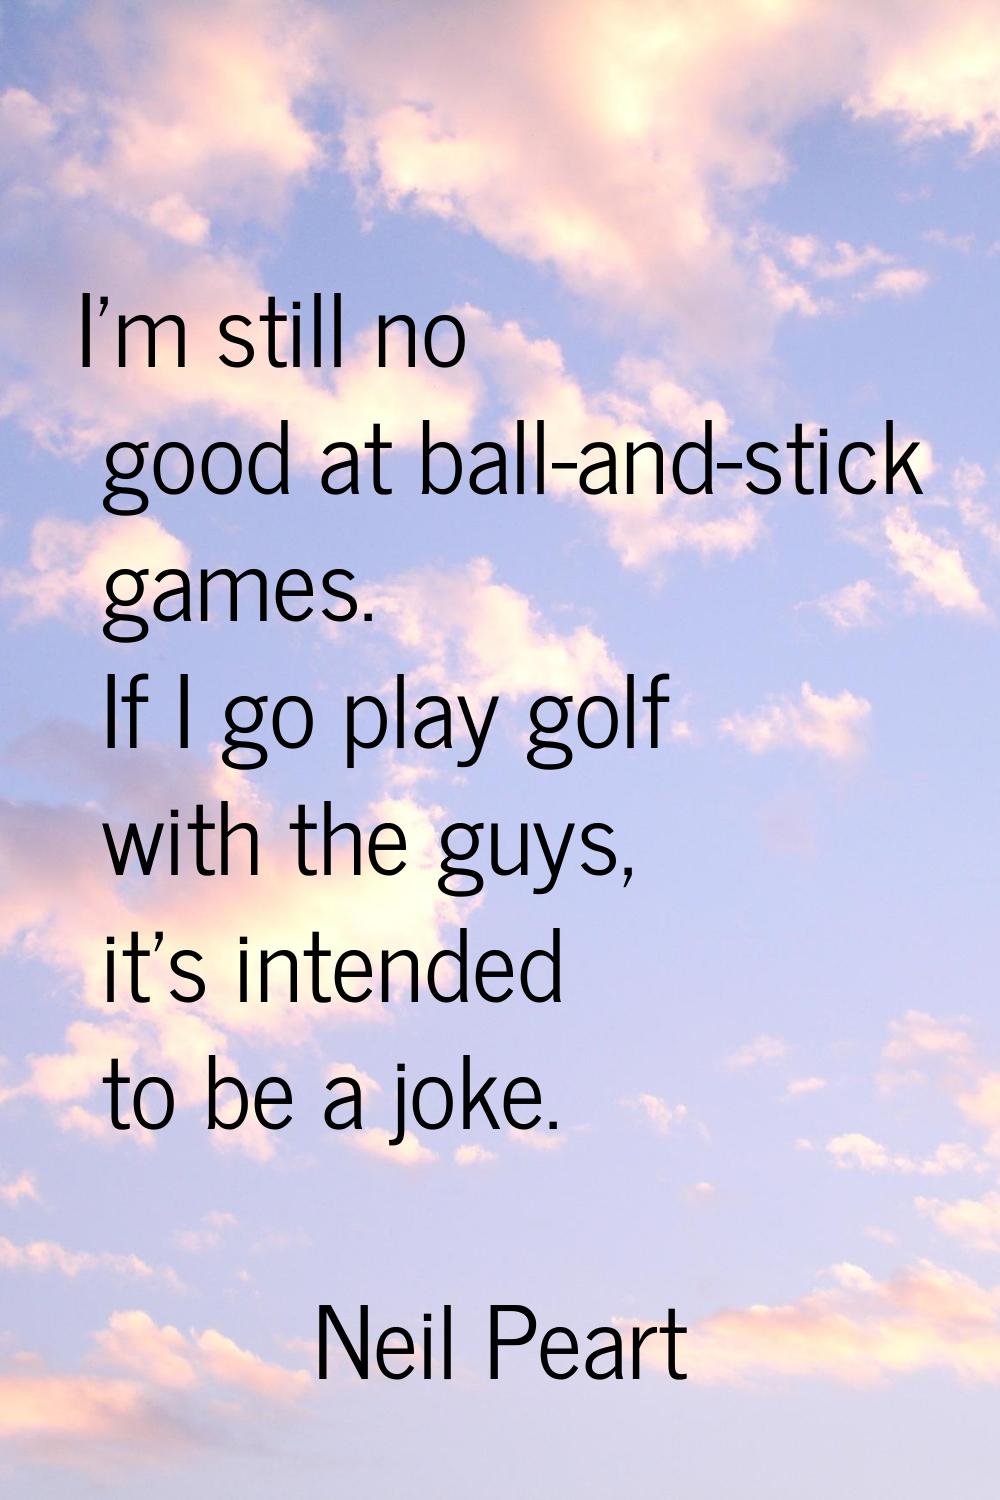 I'm still no good at ball-and-stick games. If I go play golf with the guys, it's intended to be a j